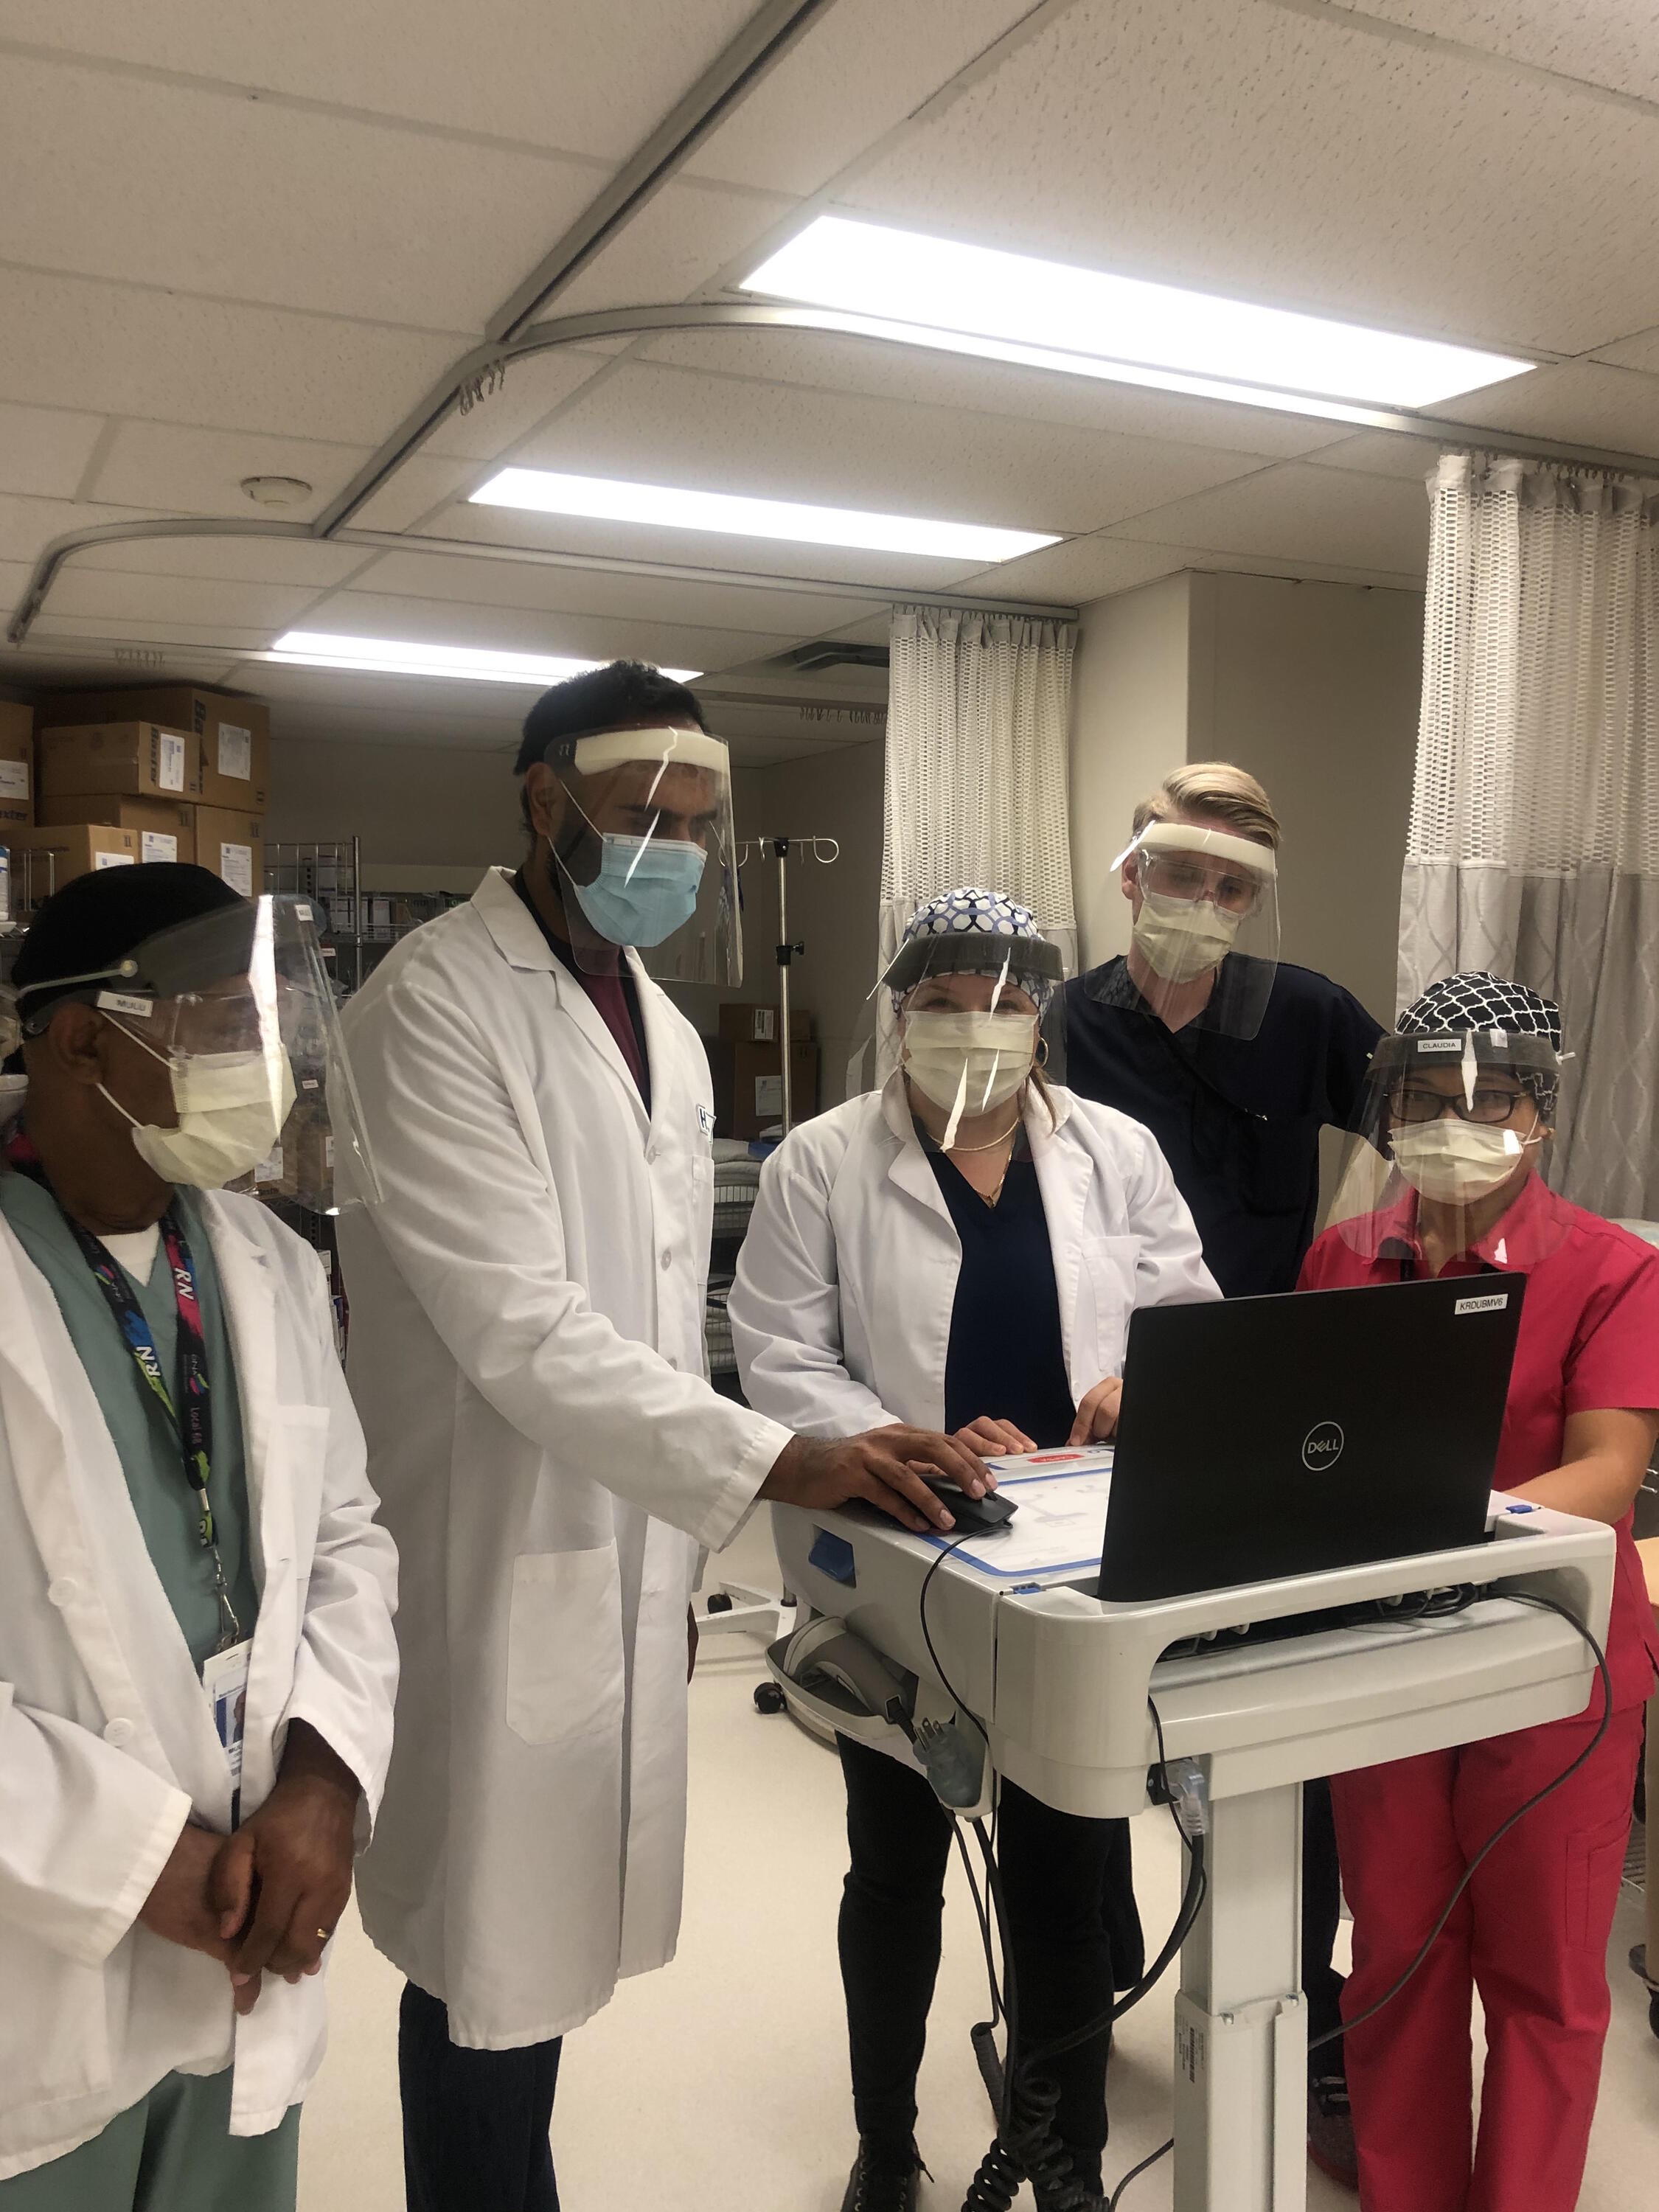 Gaganpal and team members standing in the hospital wearing PPE